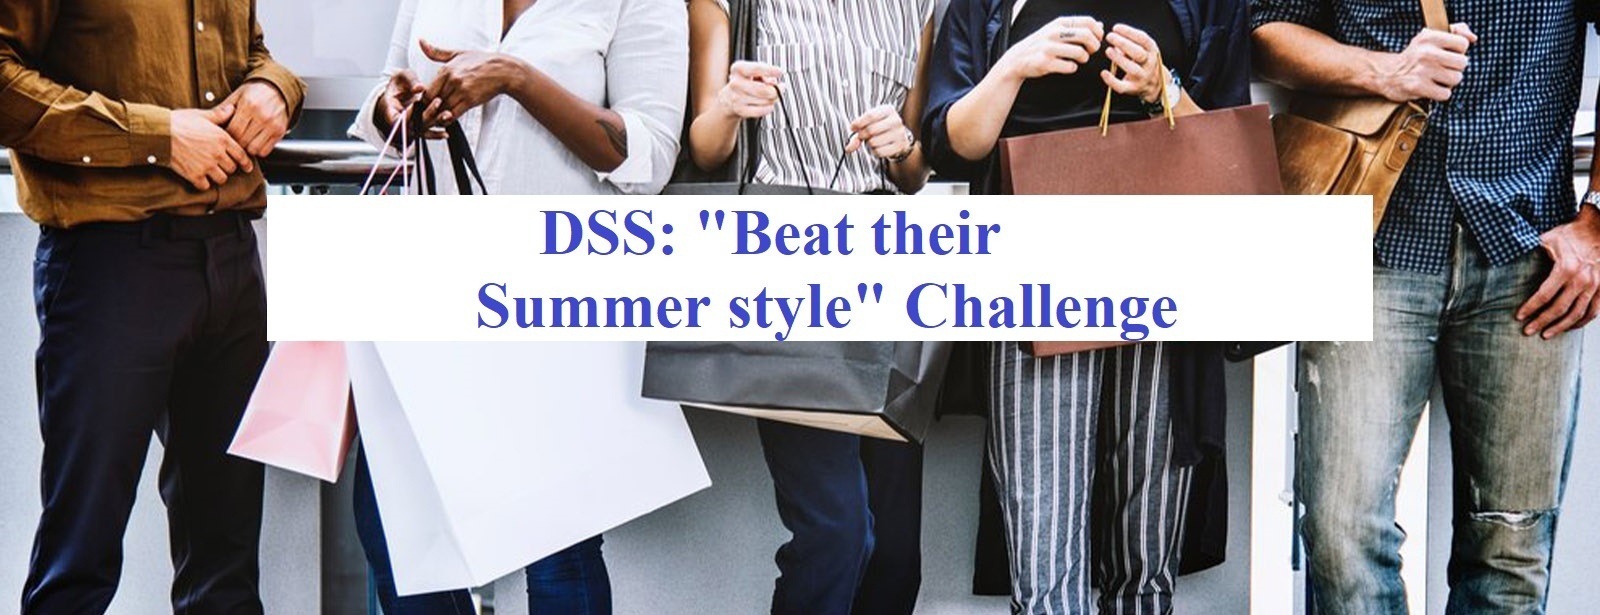 DSS: “Beat their Summer style” Challenge - Coming Soon in UAE